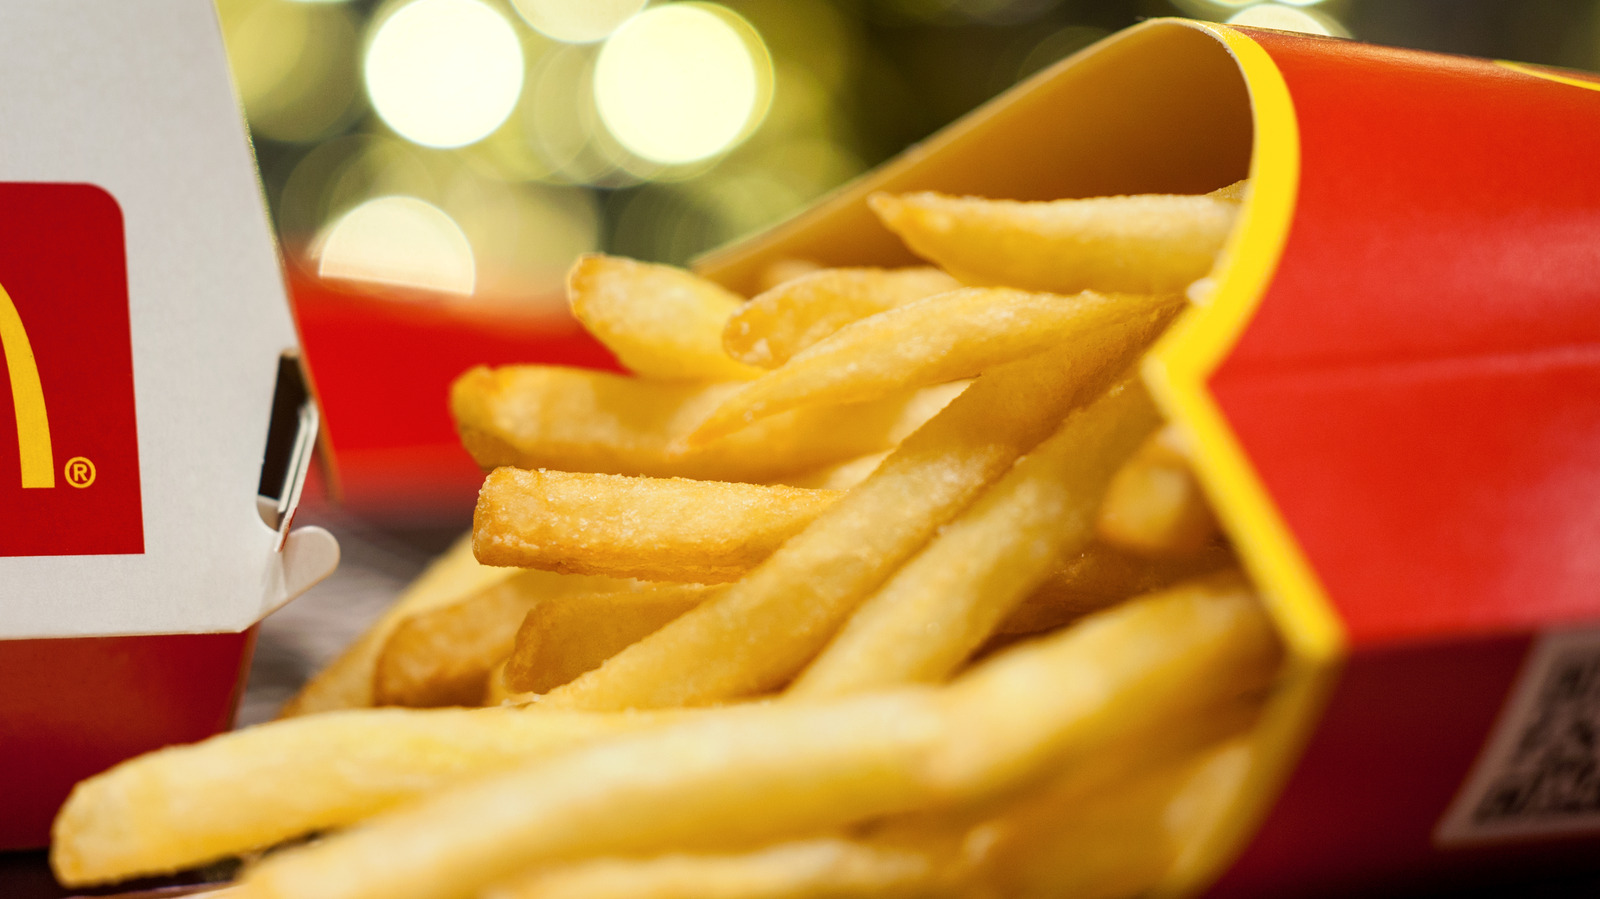 Can You Get A Free Fry Refill At McDonald's By Just Asking?